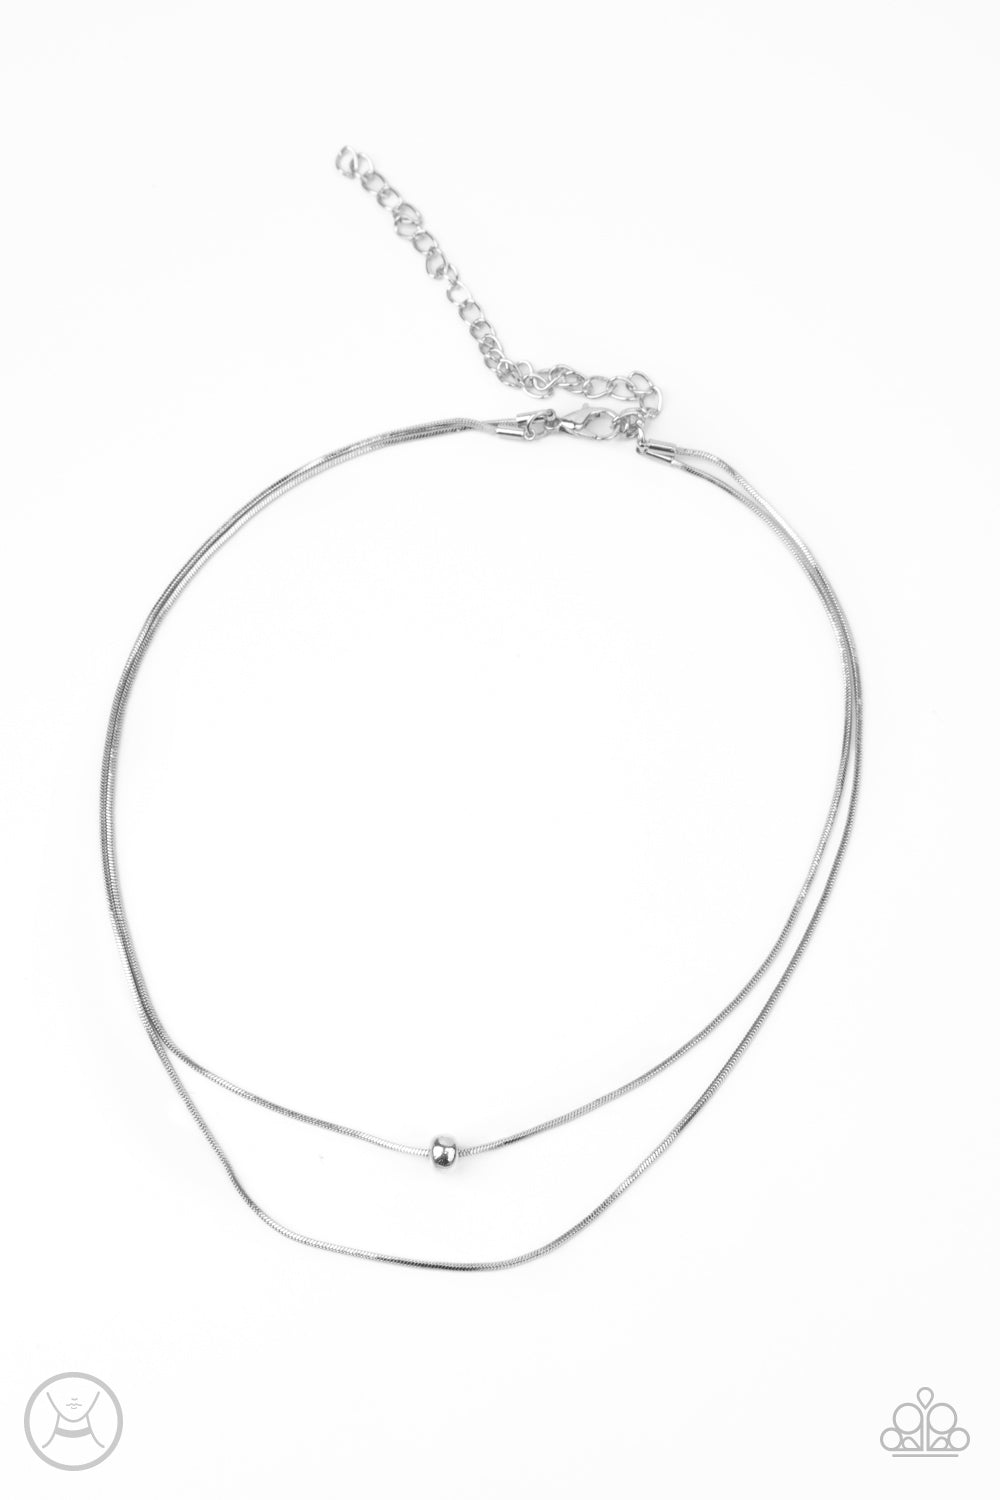 Super Slim Silver Choker Necklace - Paparazzi Accessories  Infused with a single silver bead, two dainty rows of rounded snake chain layer around the neck for a seamlessly chic look. Features an adjustable clasp closure.  All Paparazzi Accessories are lead free and nickel free!  Sold as one individual choker necklace. Includes one pair of matching earrings.